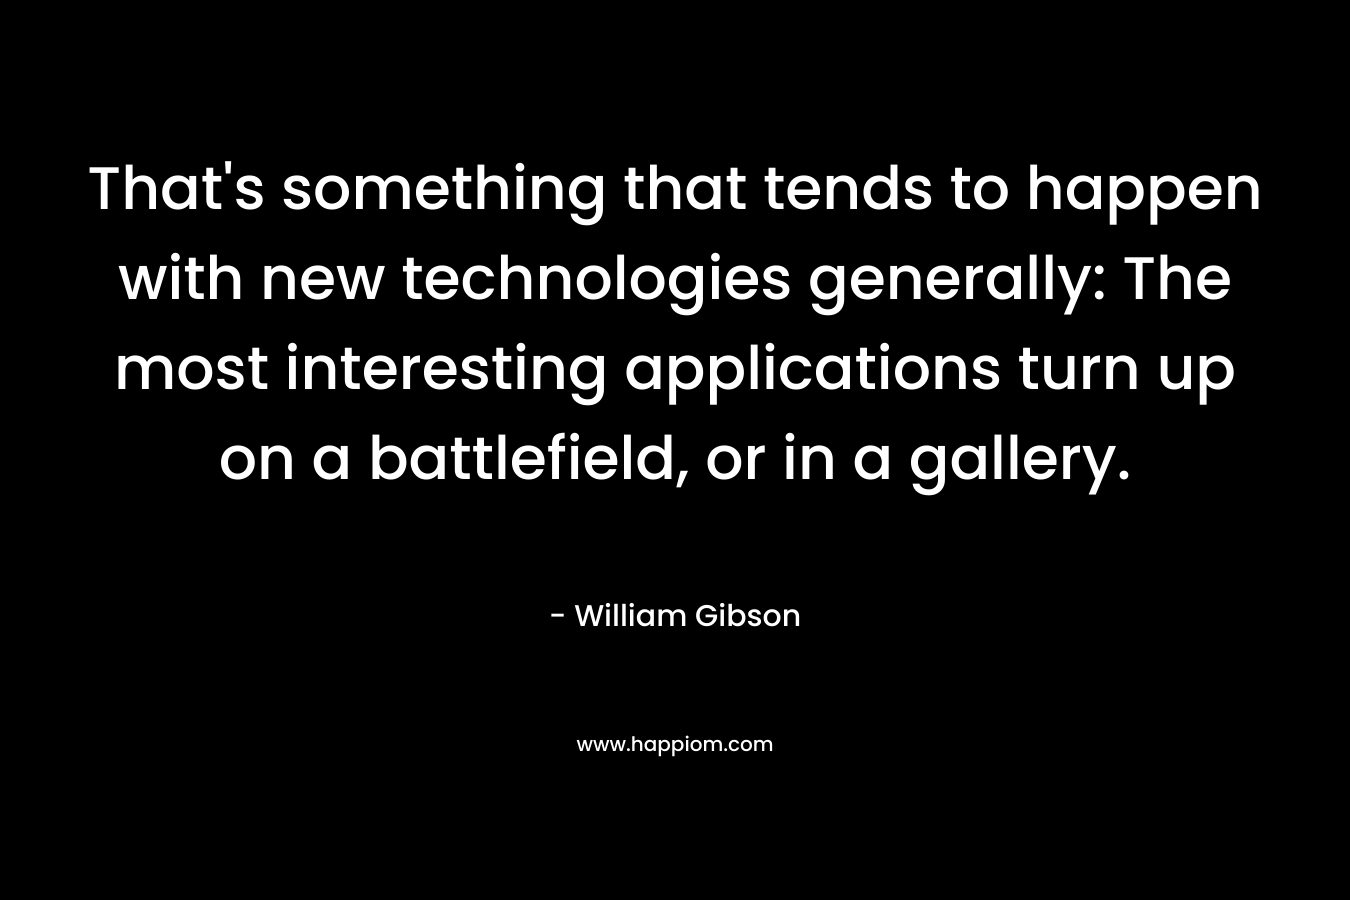 That's something that tends to happen with new technologies generally: The most interesting applications turn up on a battlefield, or in a gallery.